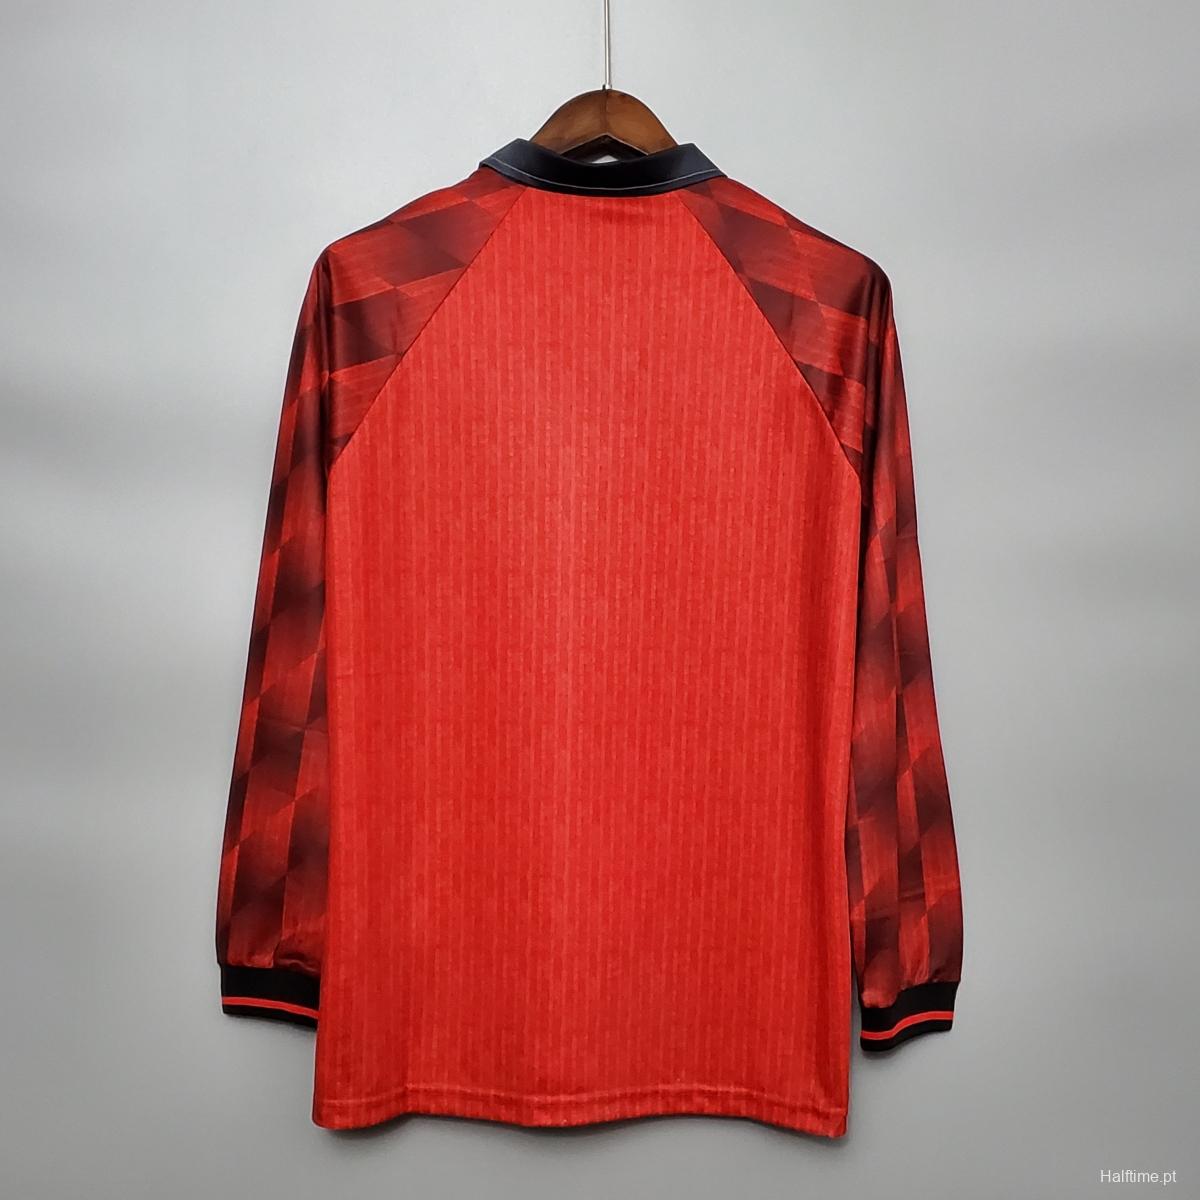 Retro Long Sleeve 1996 Manchester United home Soccer Jersey